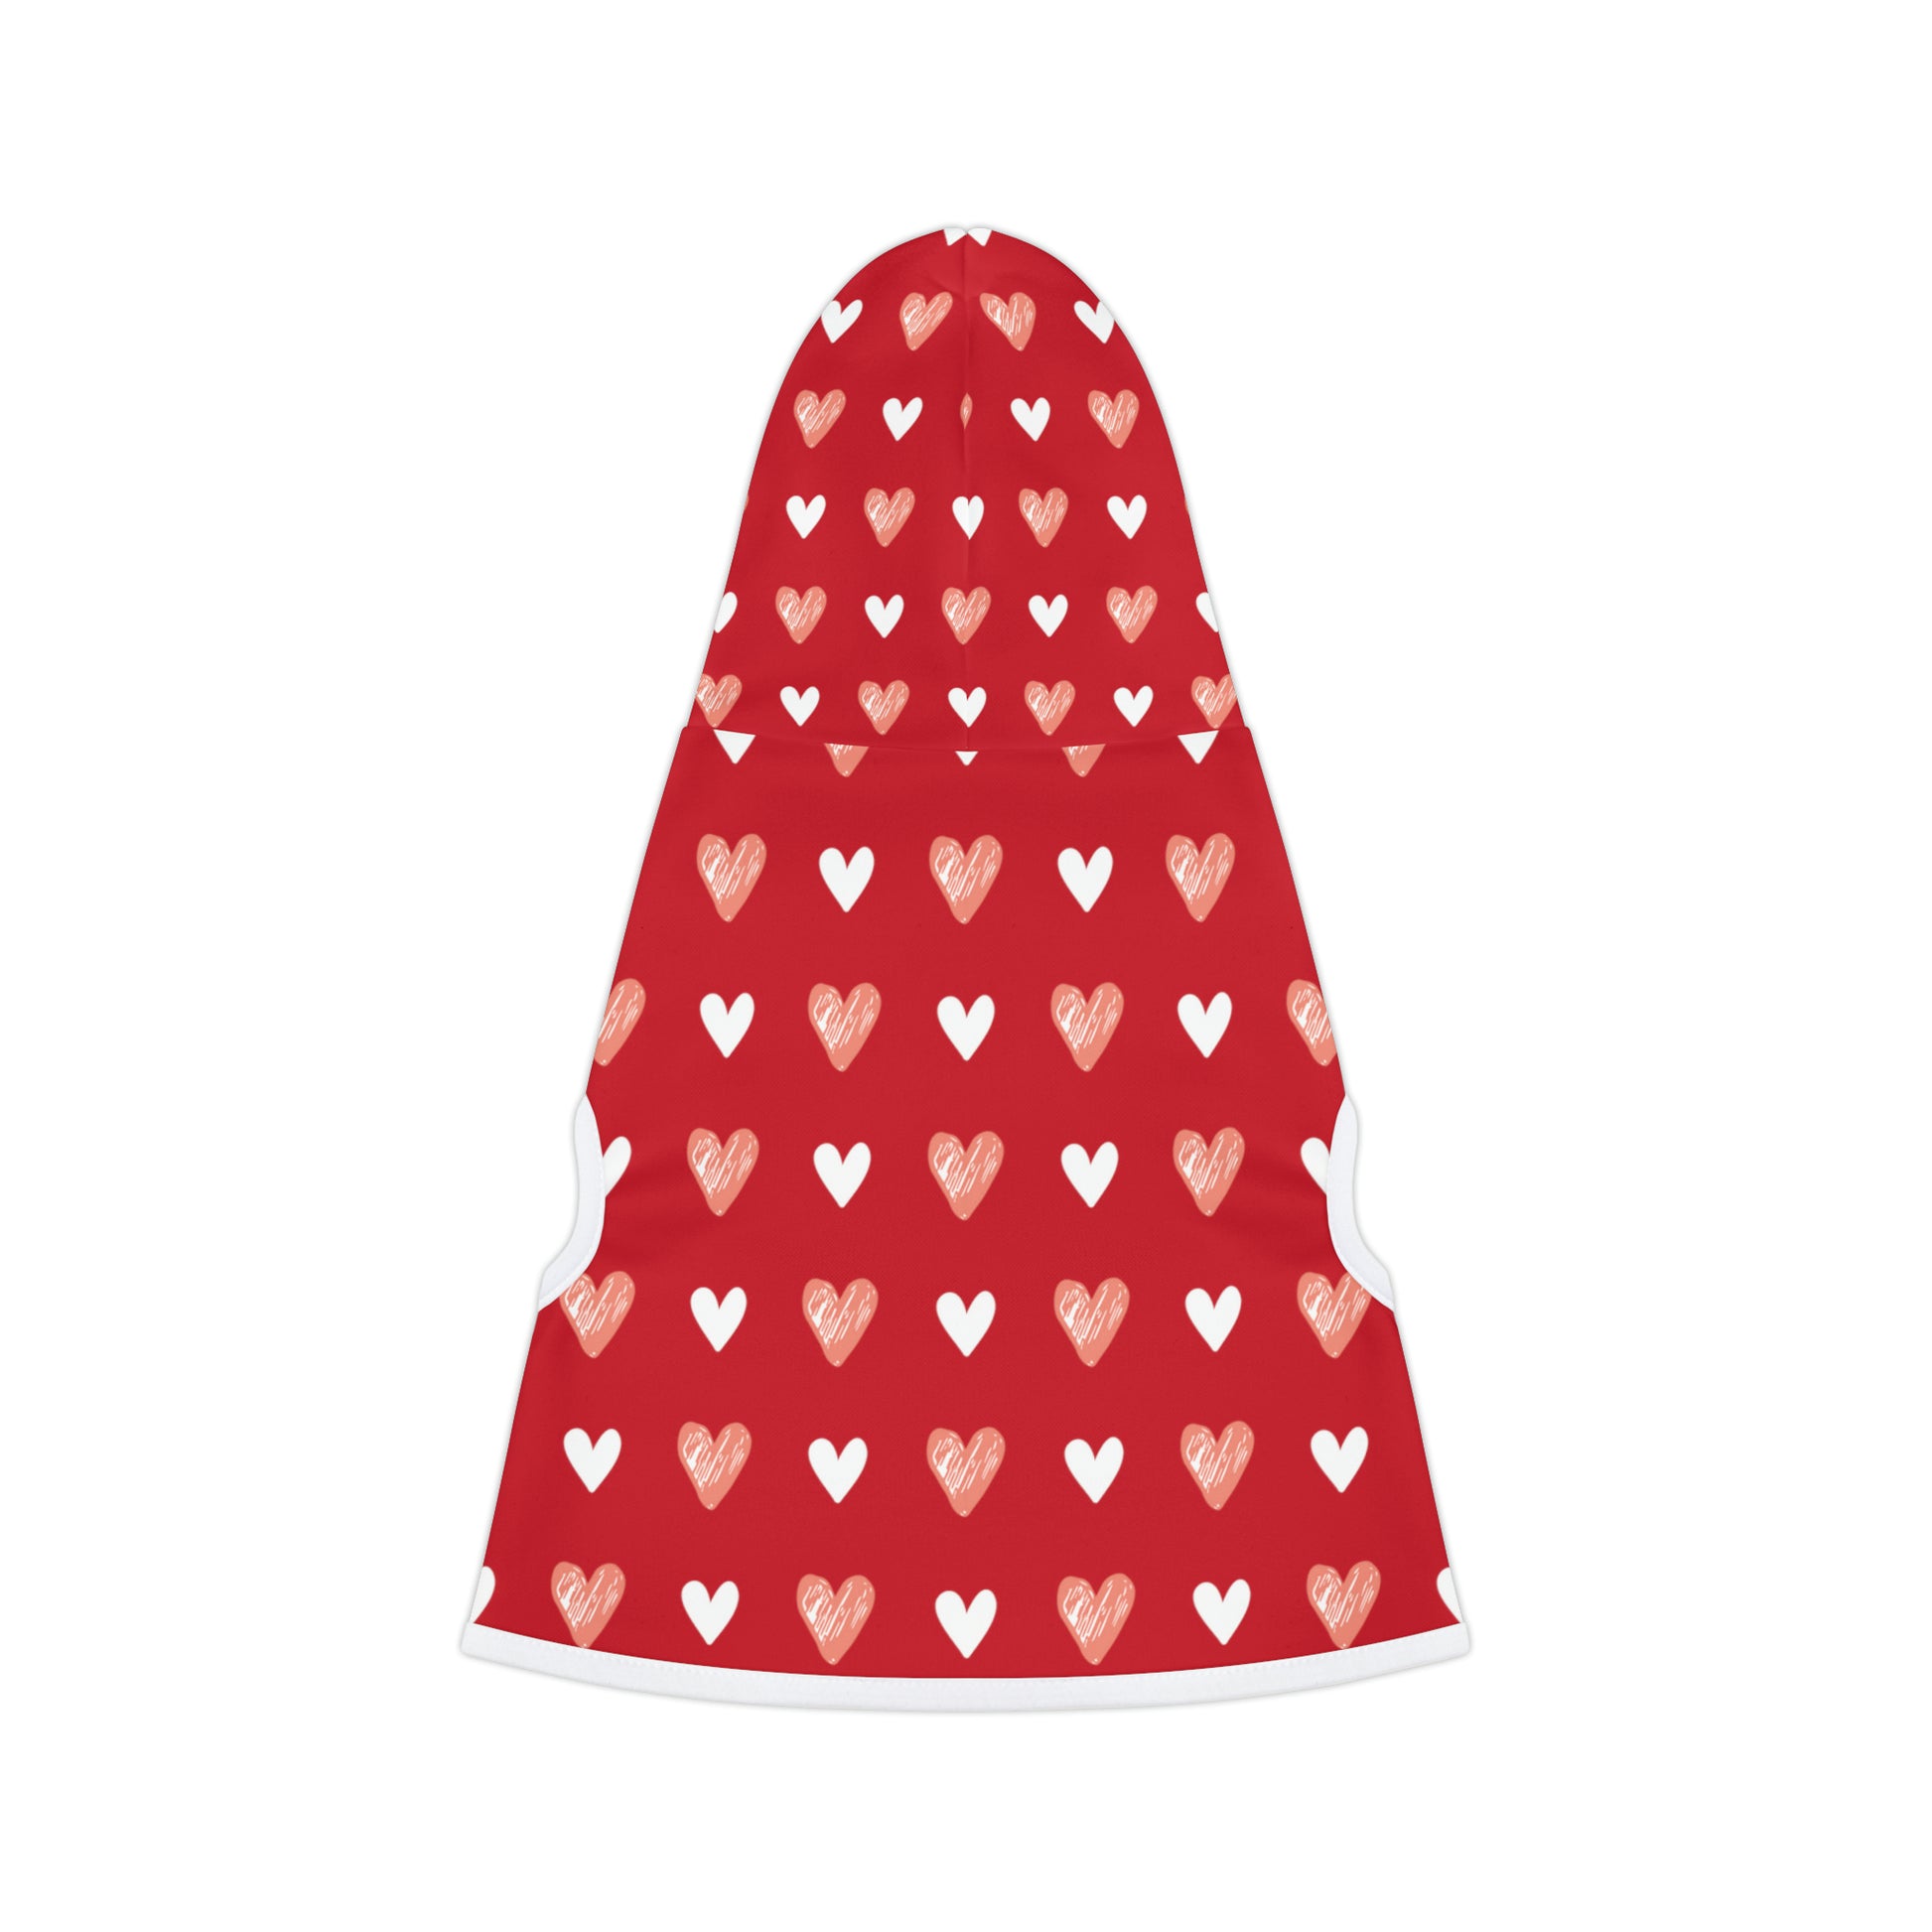 a pet hoodie with a beautiful hearts pattern design. Hoodie's Color is red